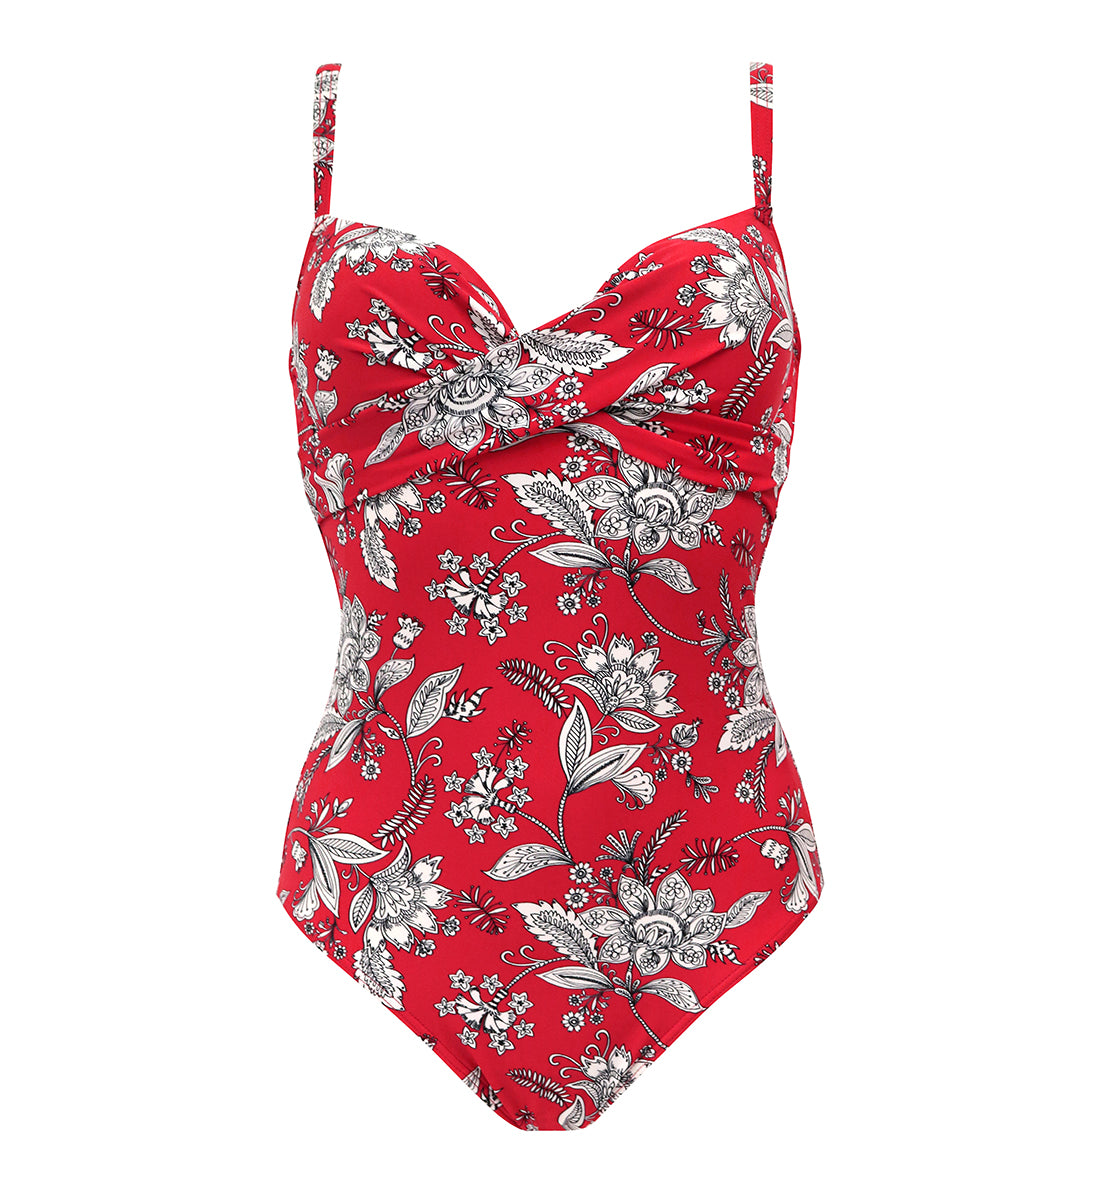 Pour Moi Freedom Lightly Padded Underwire Twist Front Control Swimsuit (25506),32E,Red/White - Red/White,32E